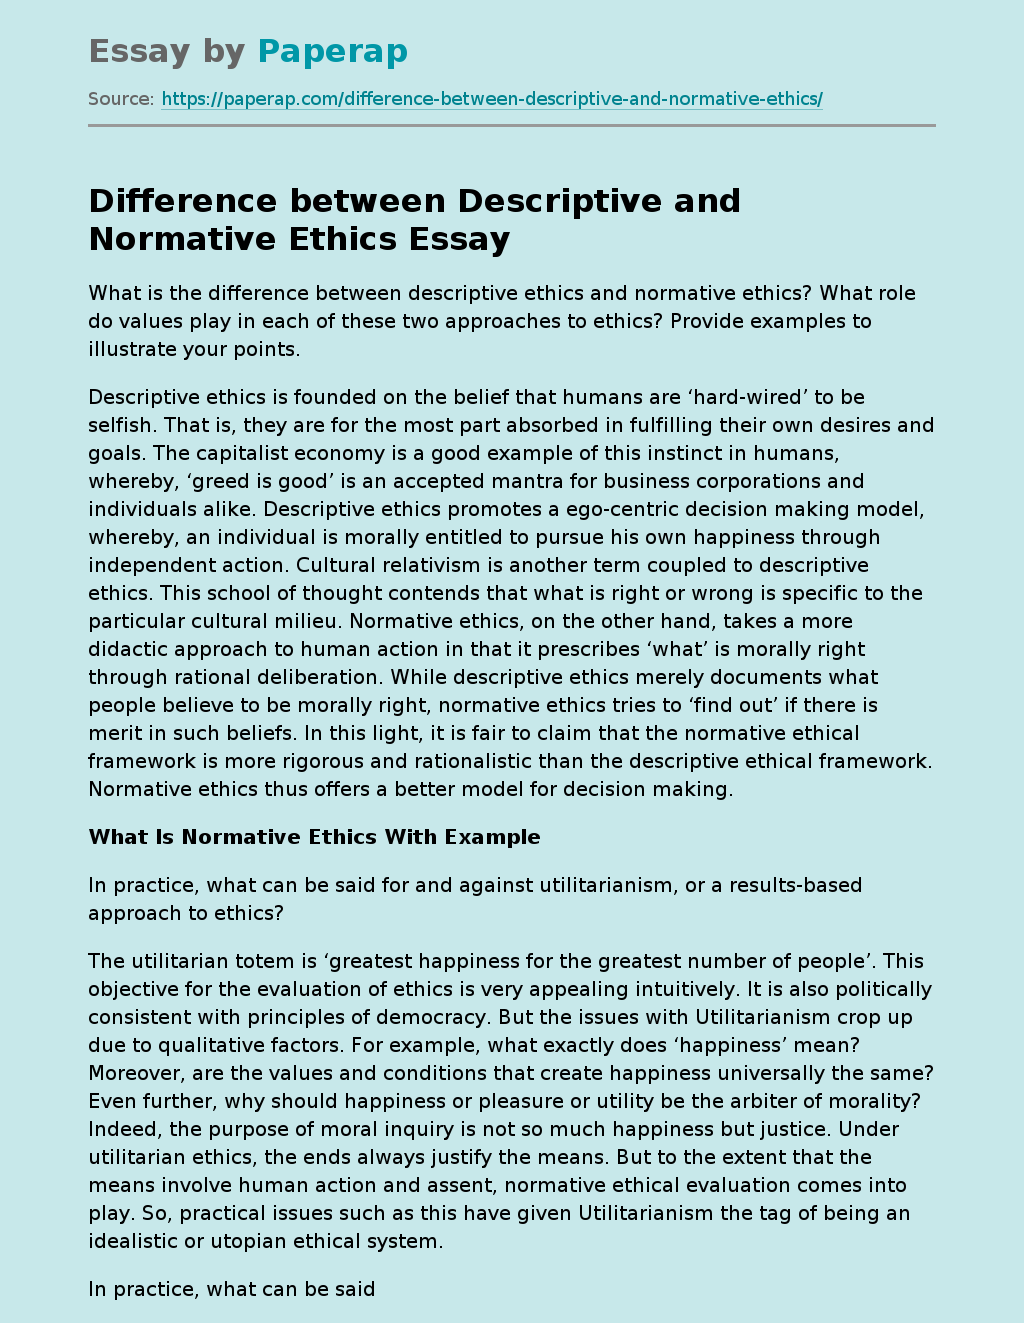 Difference between Descriptive and Normative Ethics